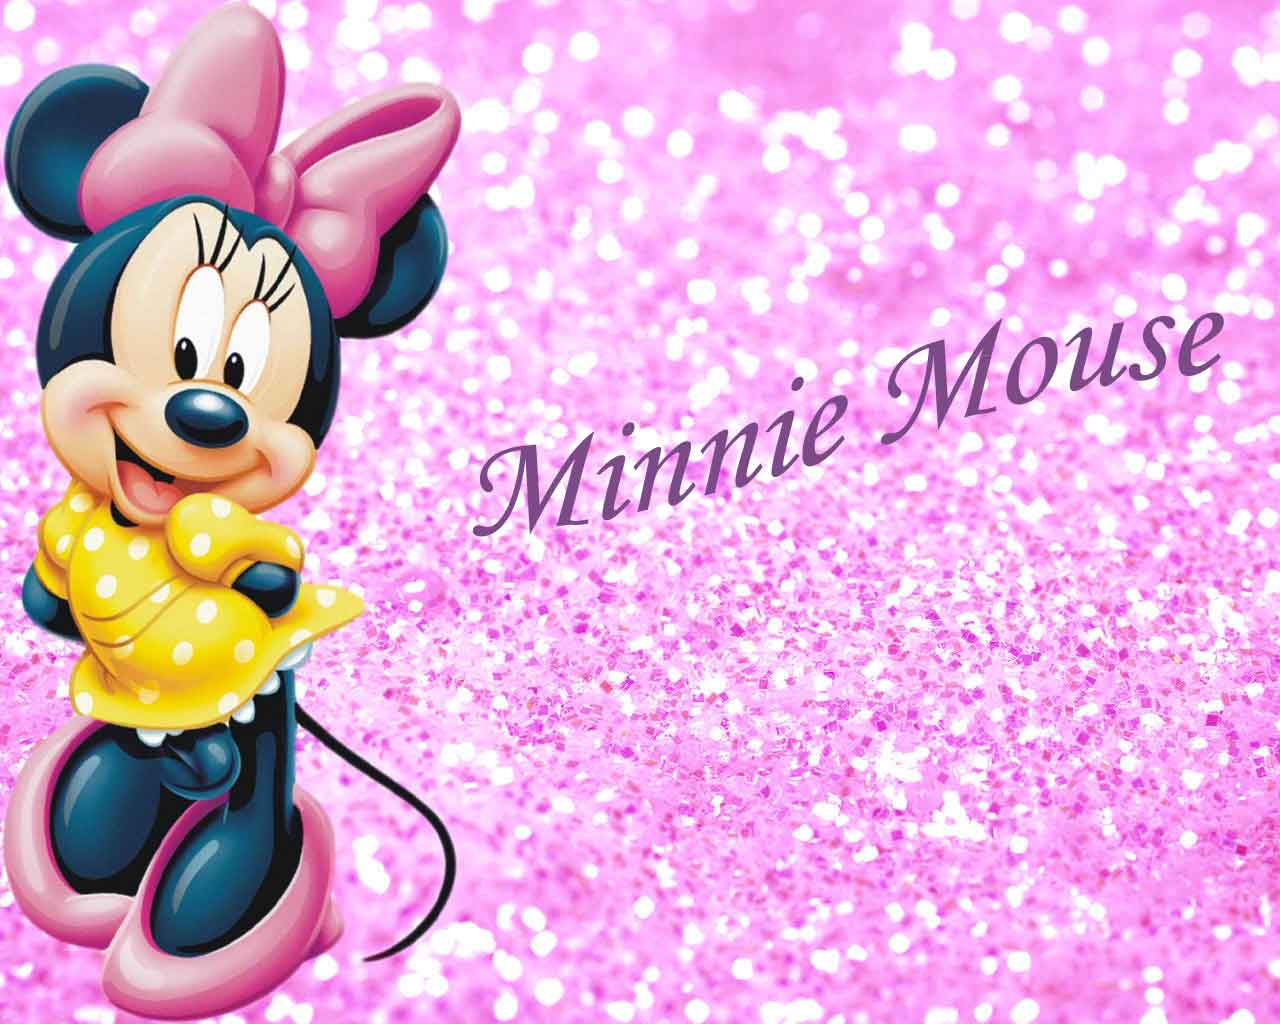 wallpaper minnie mouse #6